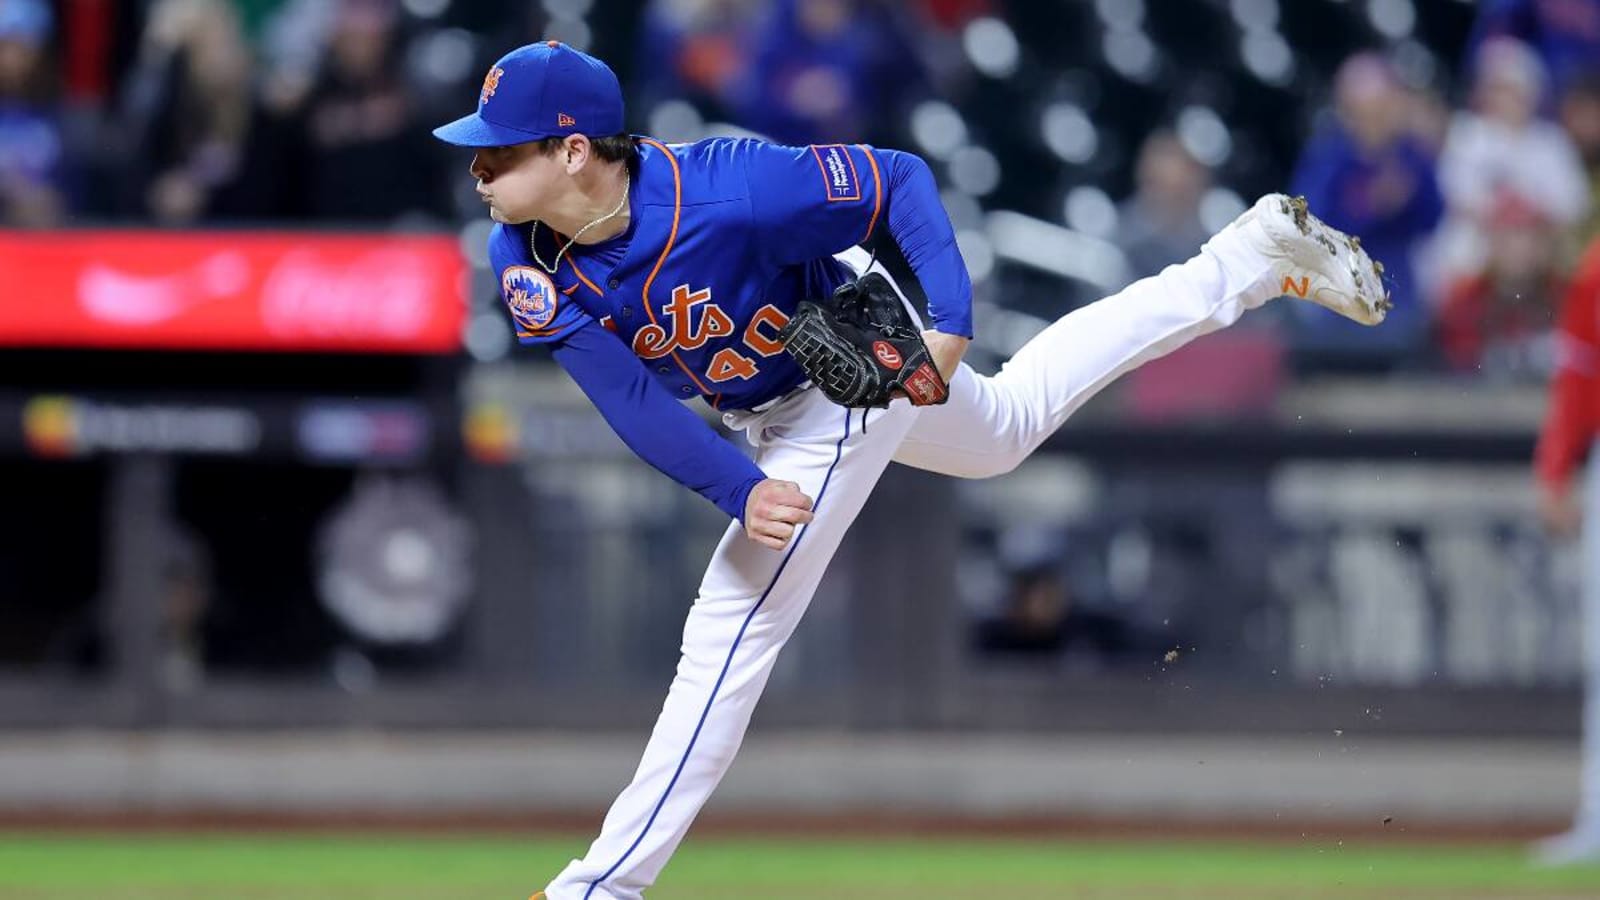 Mets Fireballer Reportedly Could Be Cut This Offseason After Inconsistent Season